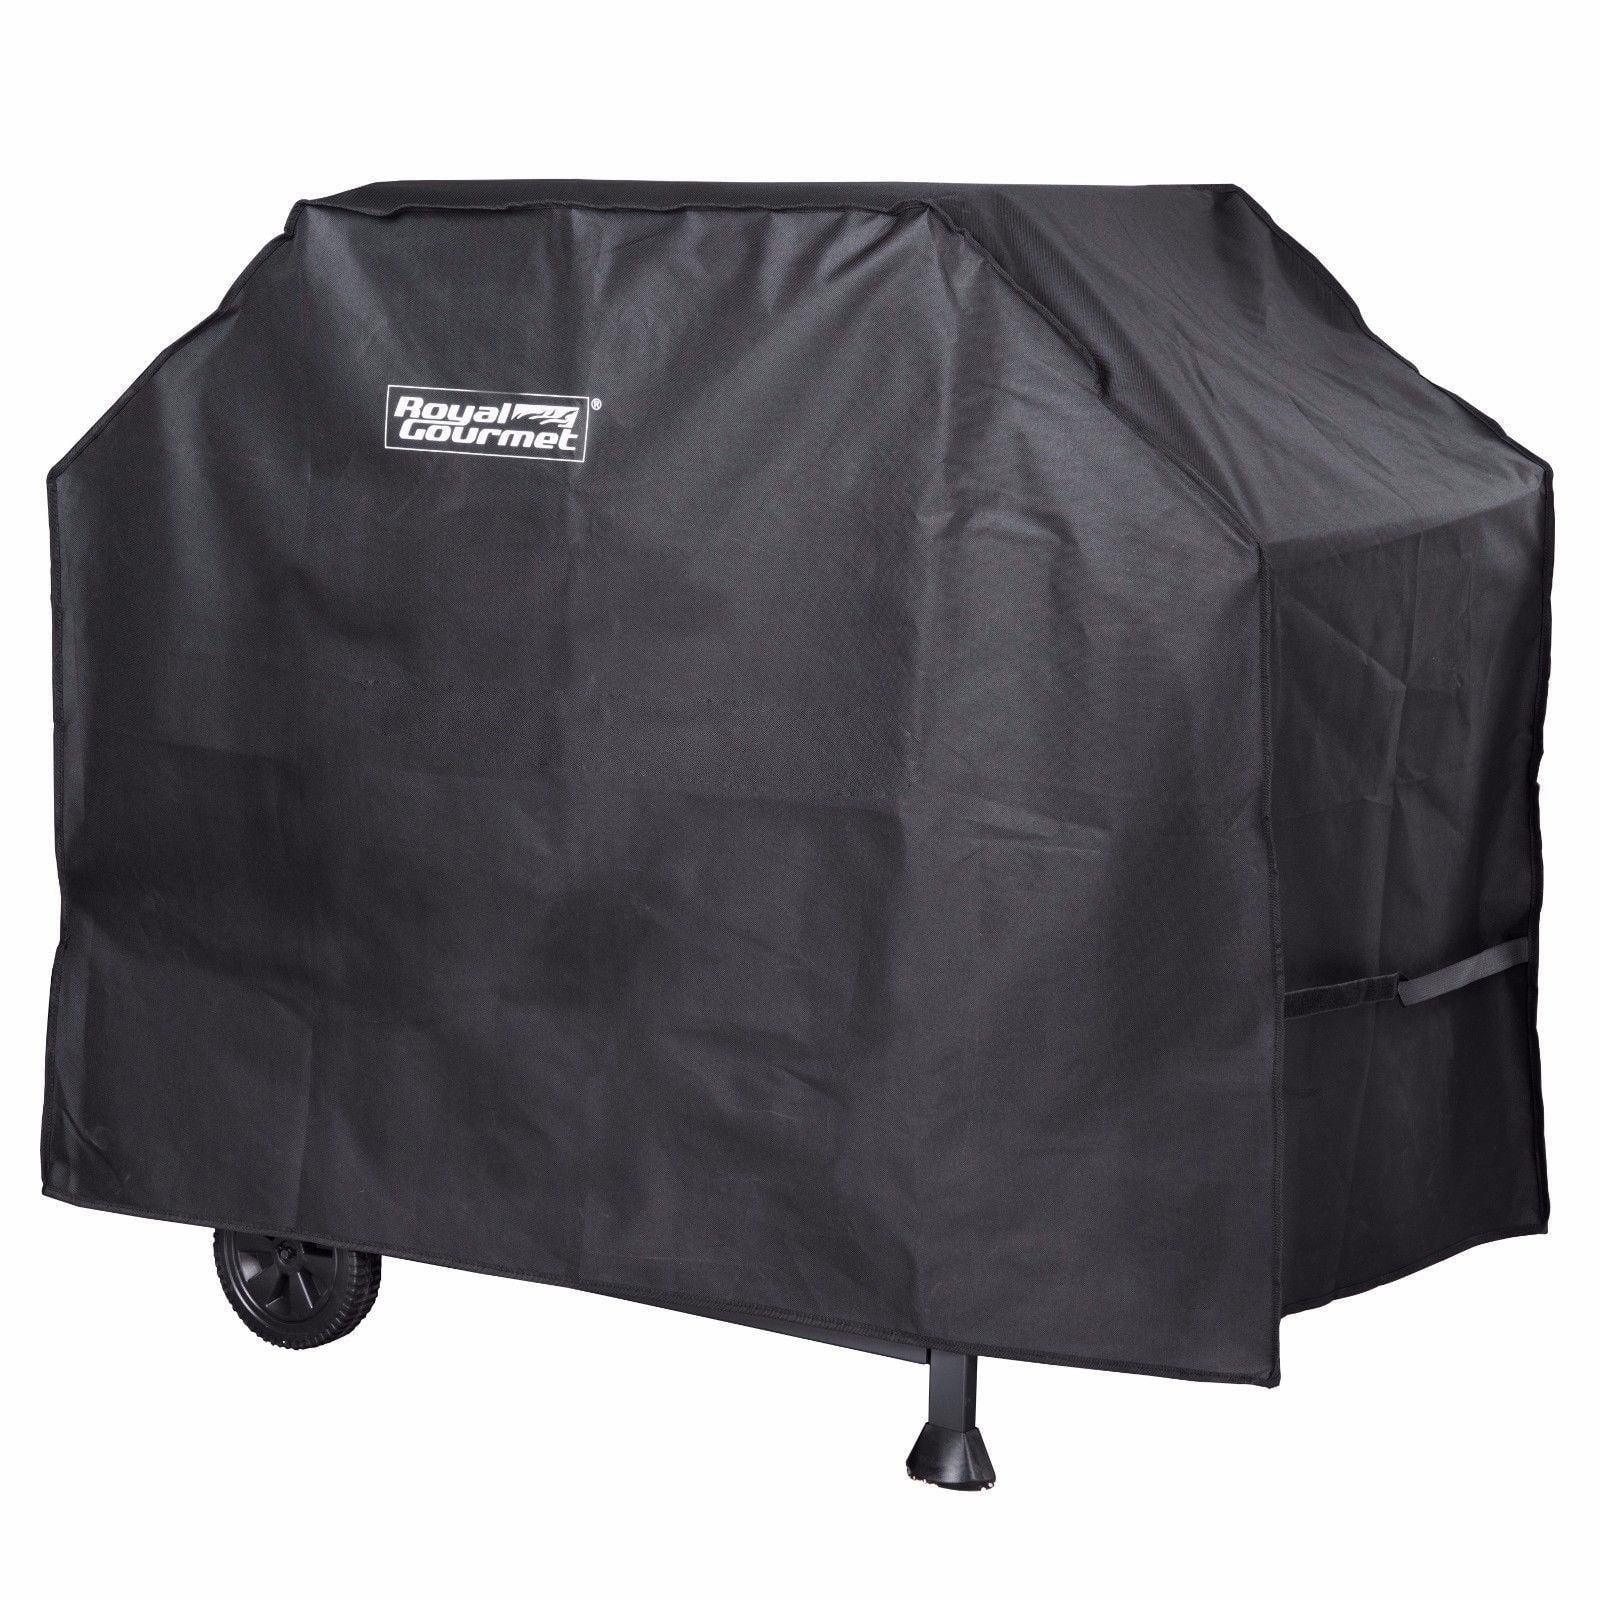 Royal Gourmet BBQ Grill Cover Protection Storage Waterproof 60 Inch Heavy Duty 